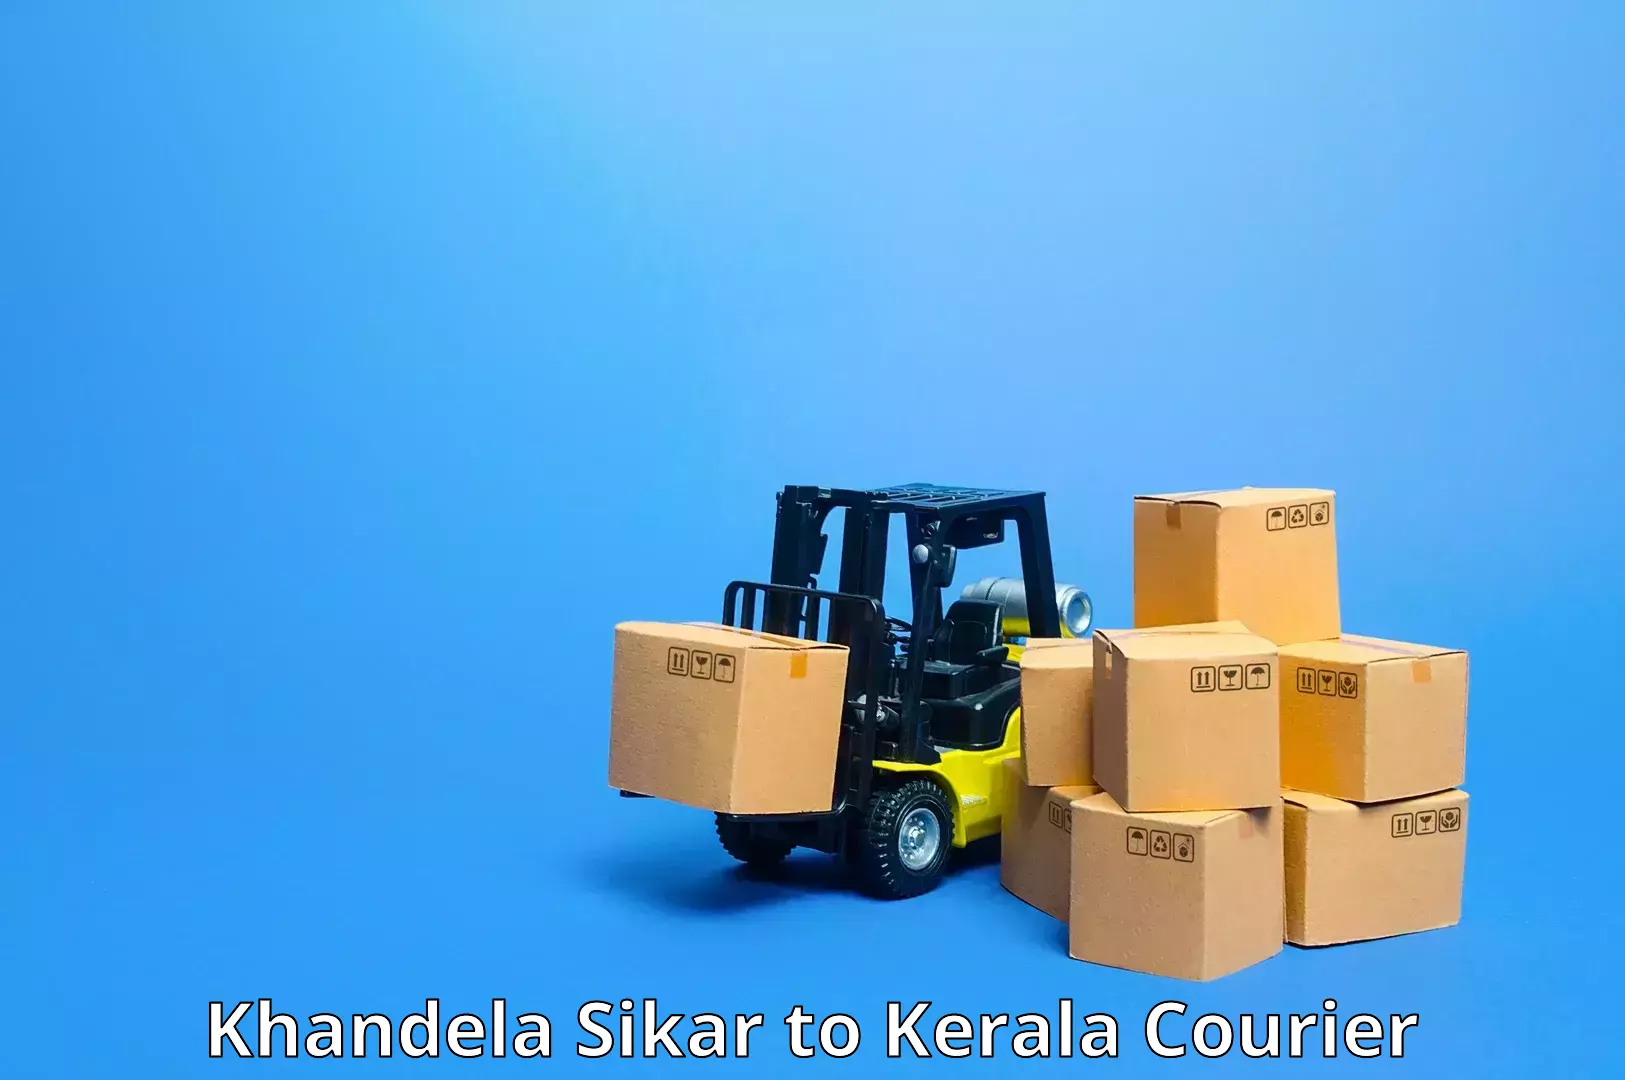 End-to-end delivery Khandela Sikar to Kerala